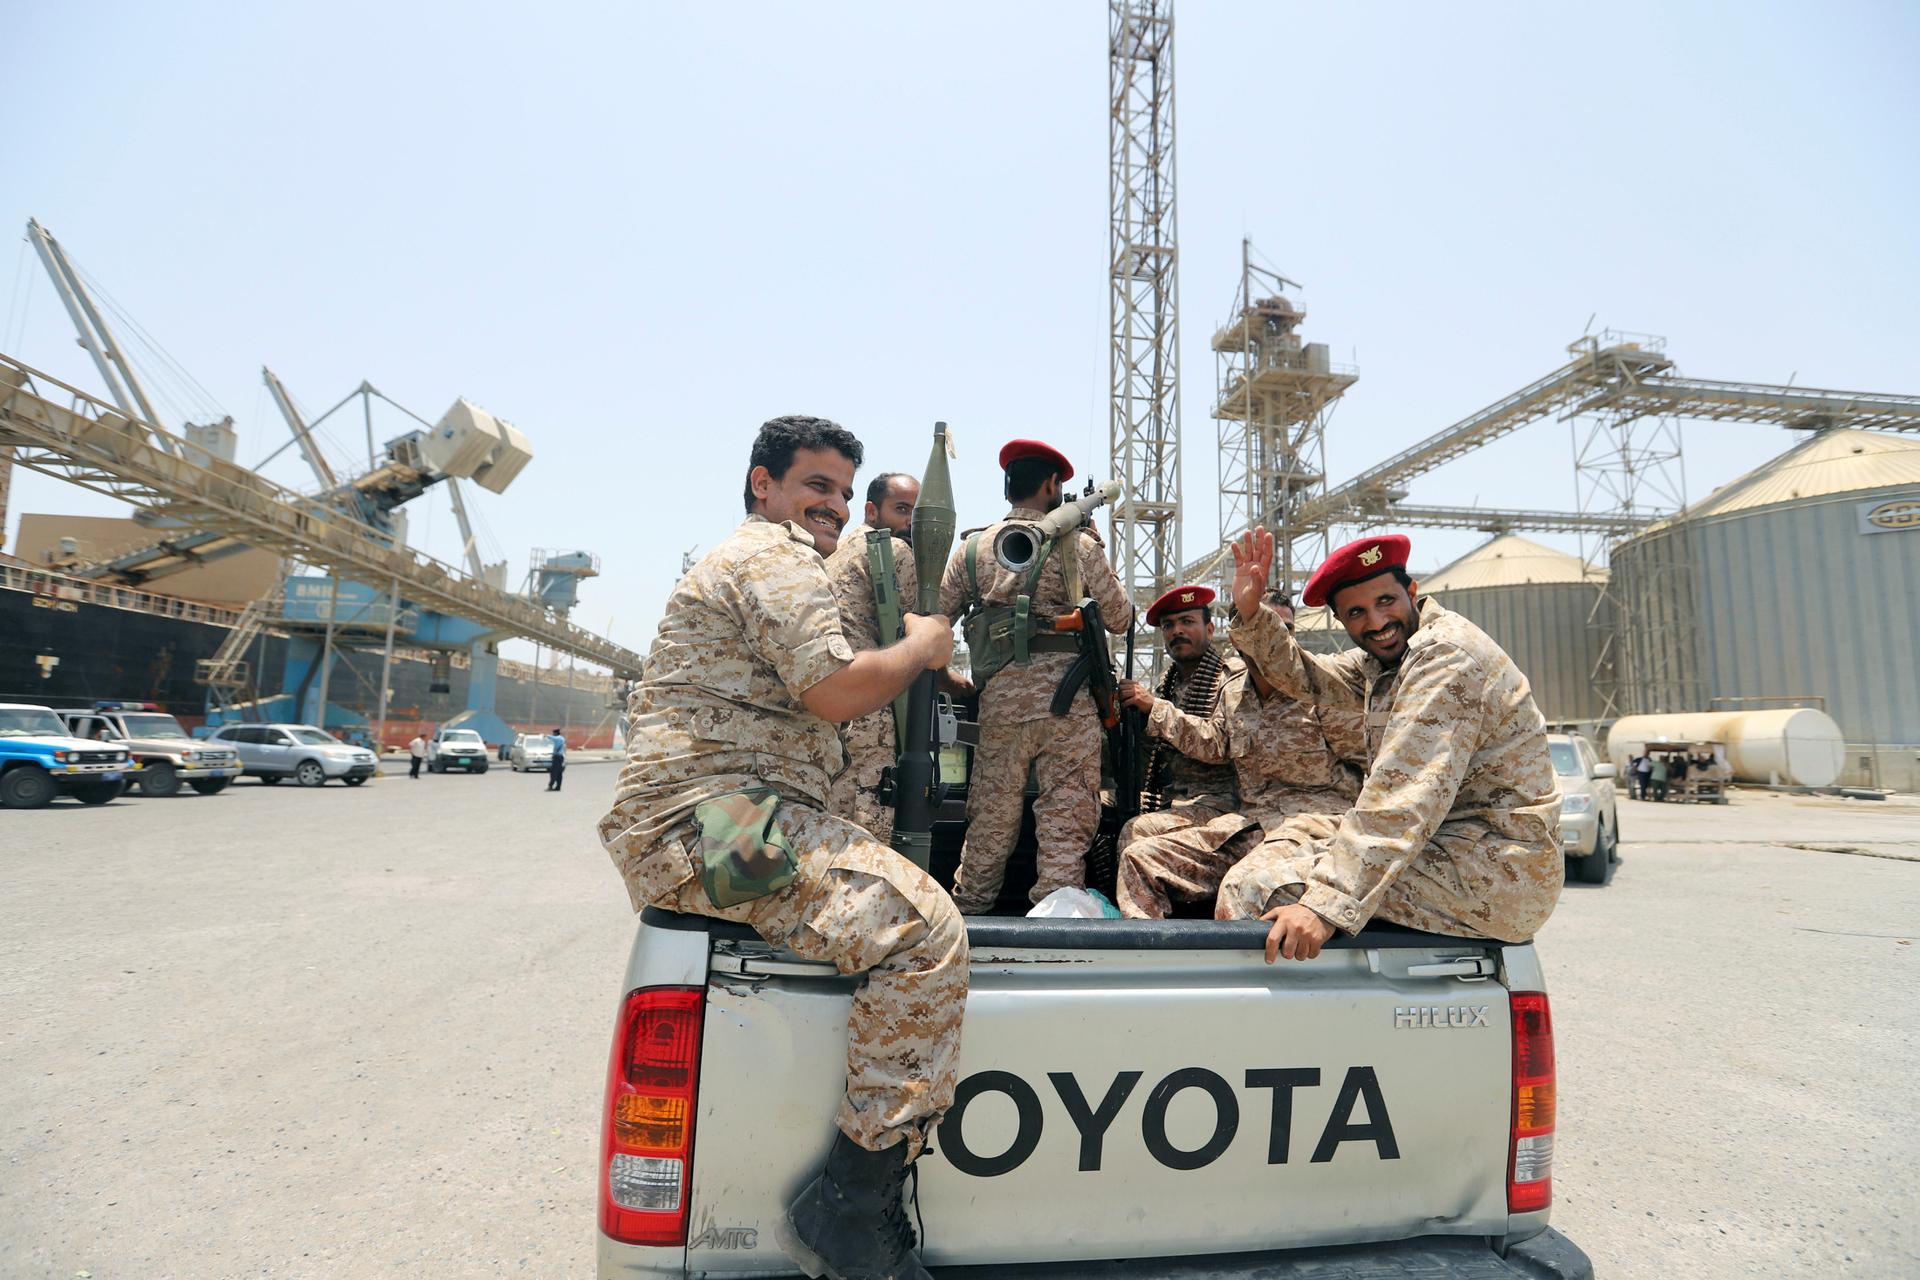 emen's Houthi movement forces ride in the back of vehicle during withdrawal from Saleef port in Hodeidah province